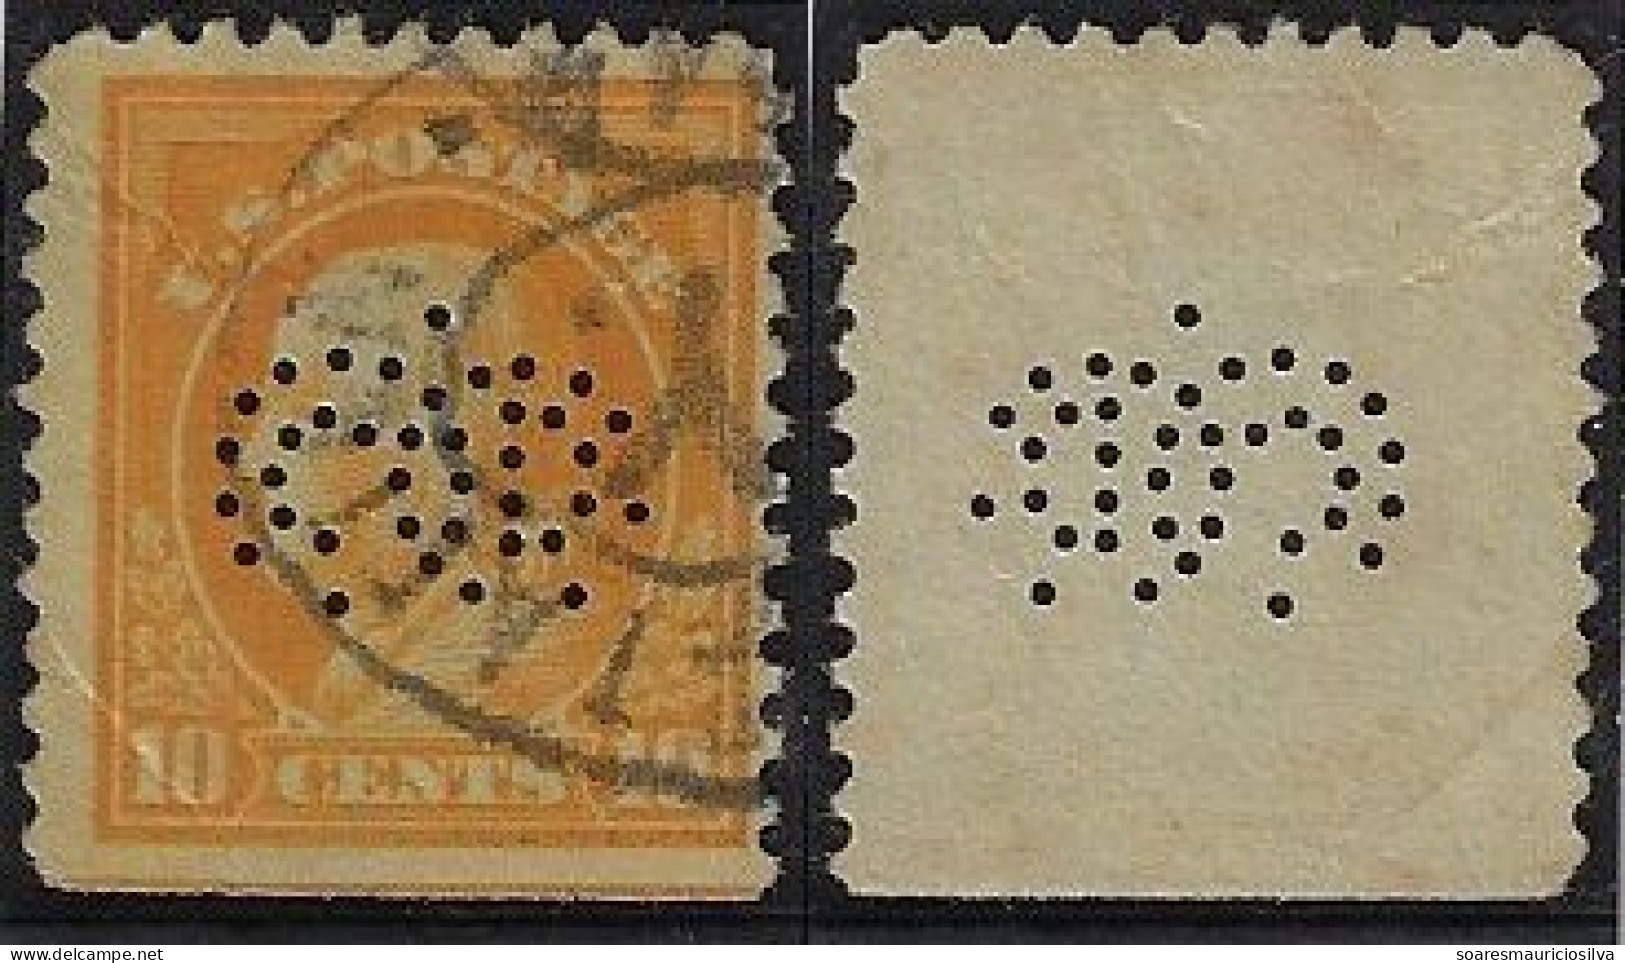 USA United States 1908/1917 Stamp With Perfin CD (circles) By Consolidated Dental Manufacturing Company Lochung Perfore - Zähnungen (Perfins)